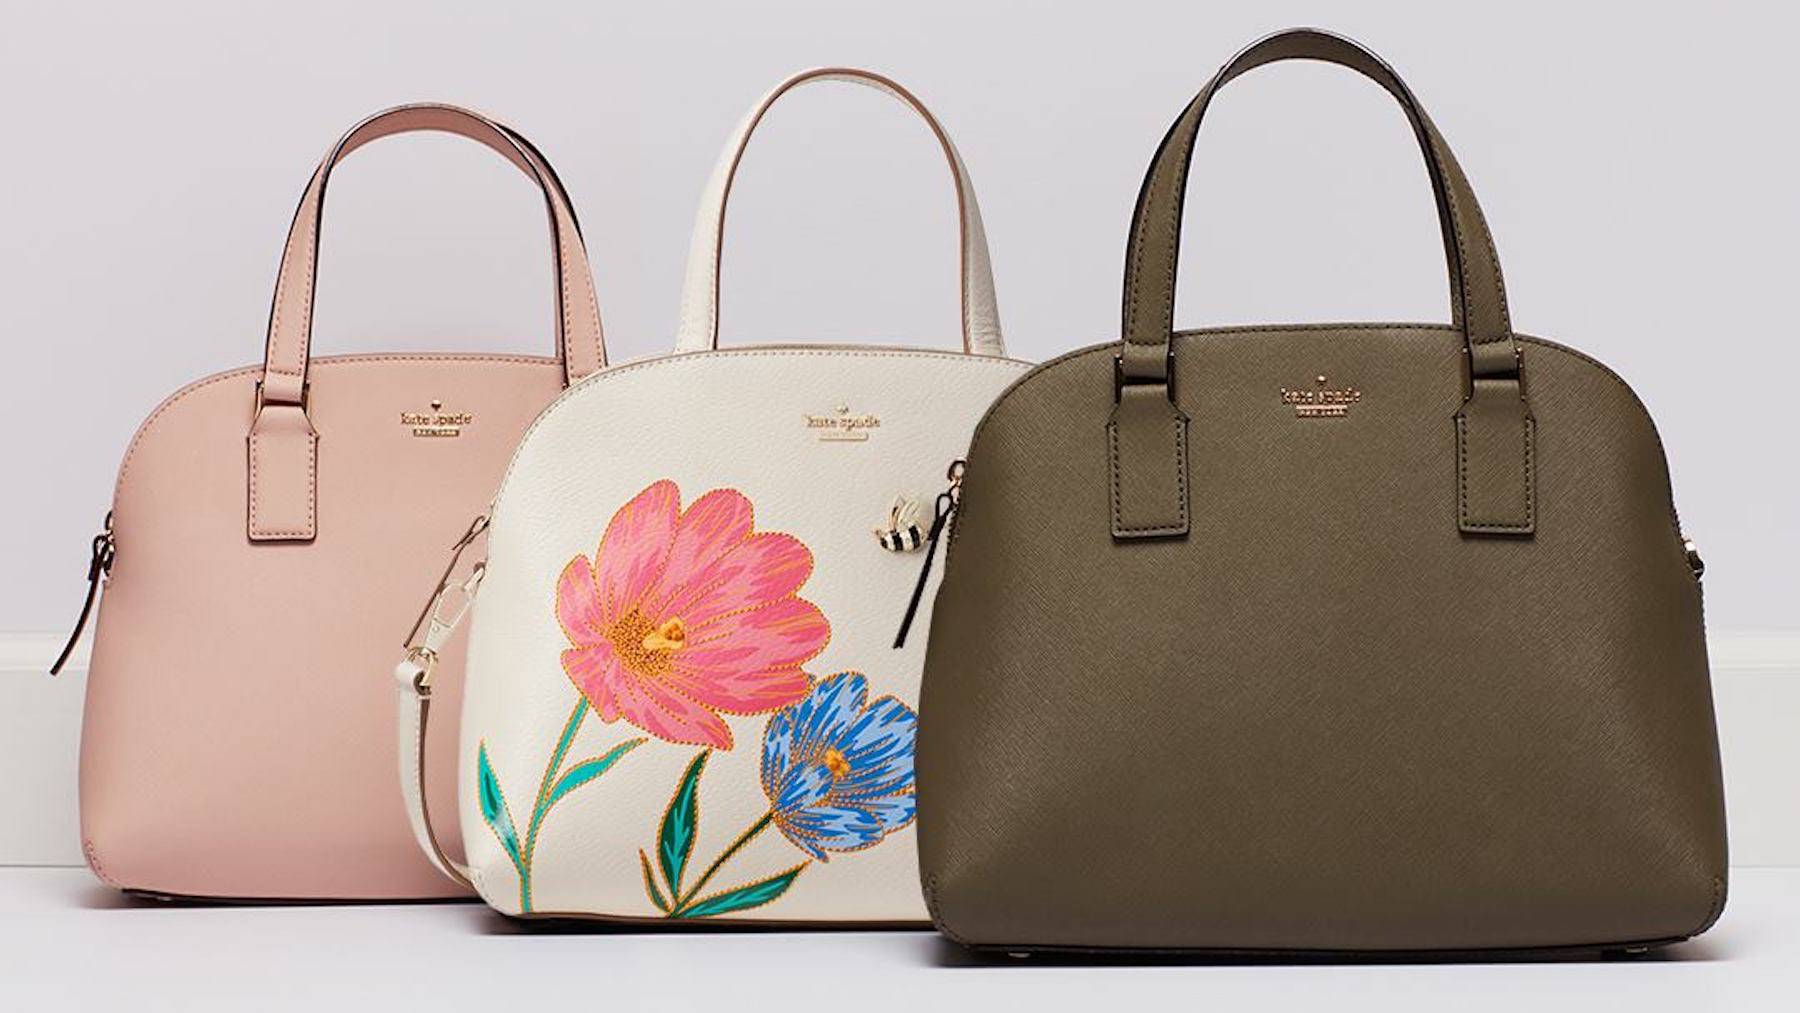 Tapestry Beats Sales Estimates on Demand for Kate Spade Bags | BoF